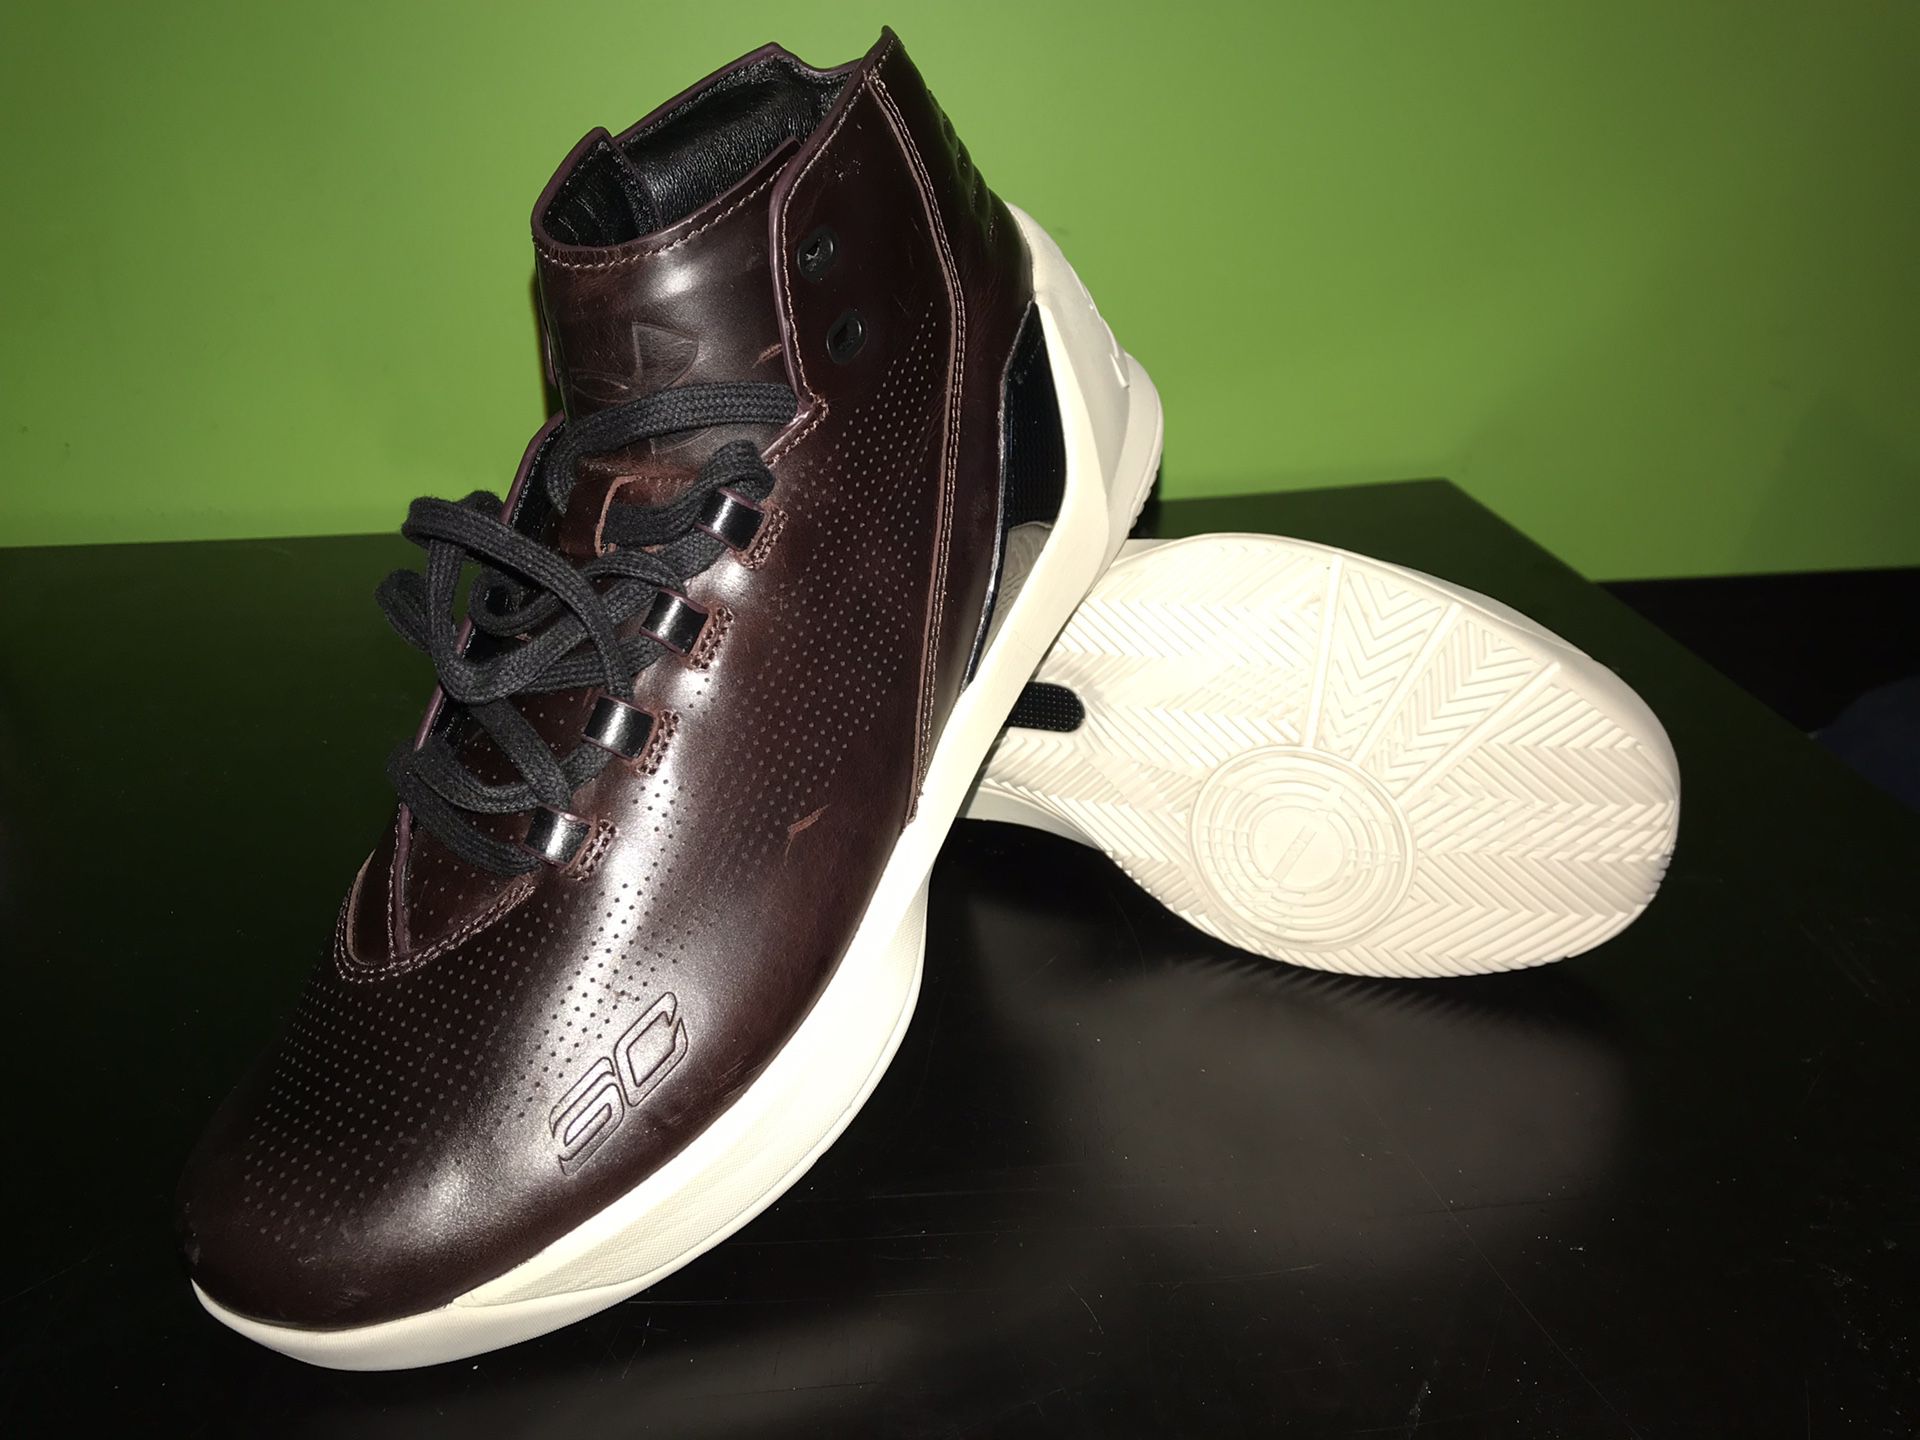 Under Armour Men's UA Curry 3 Lux Limited Edition Shoes - Sz 10.5, Oxblood Leather